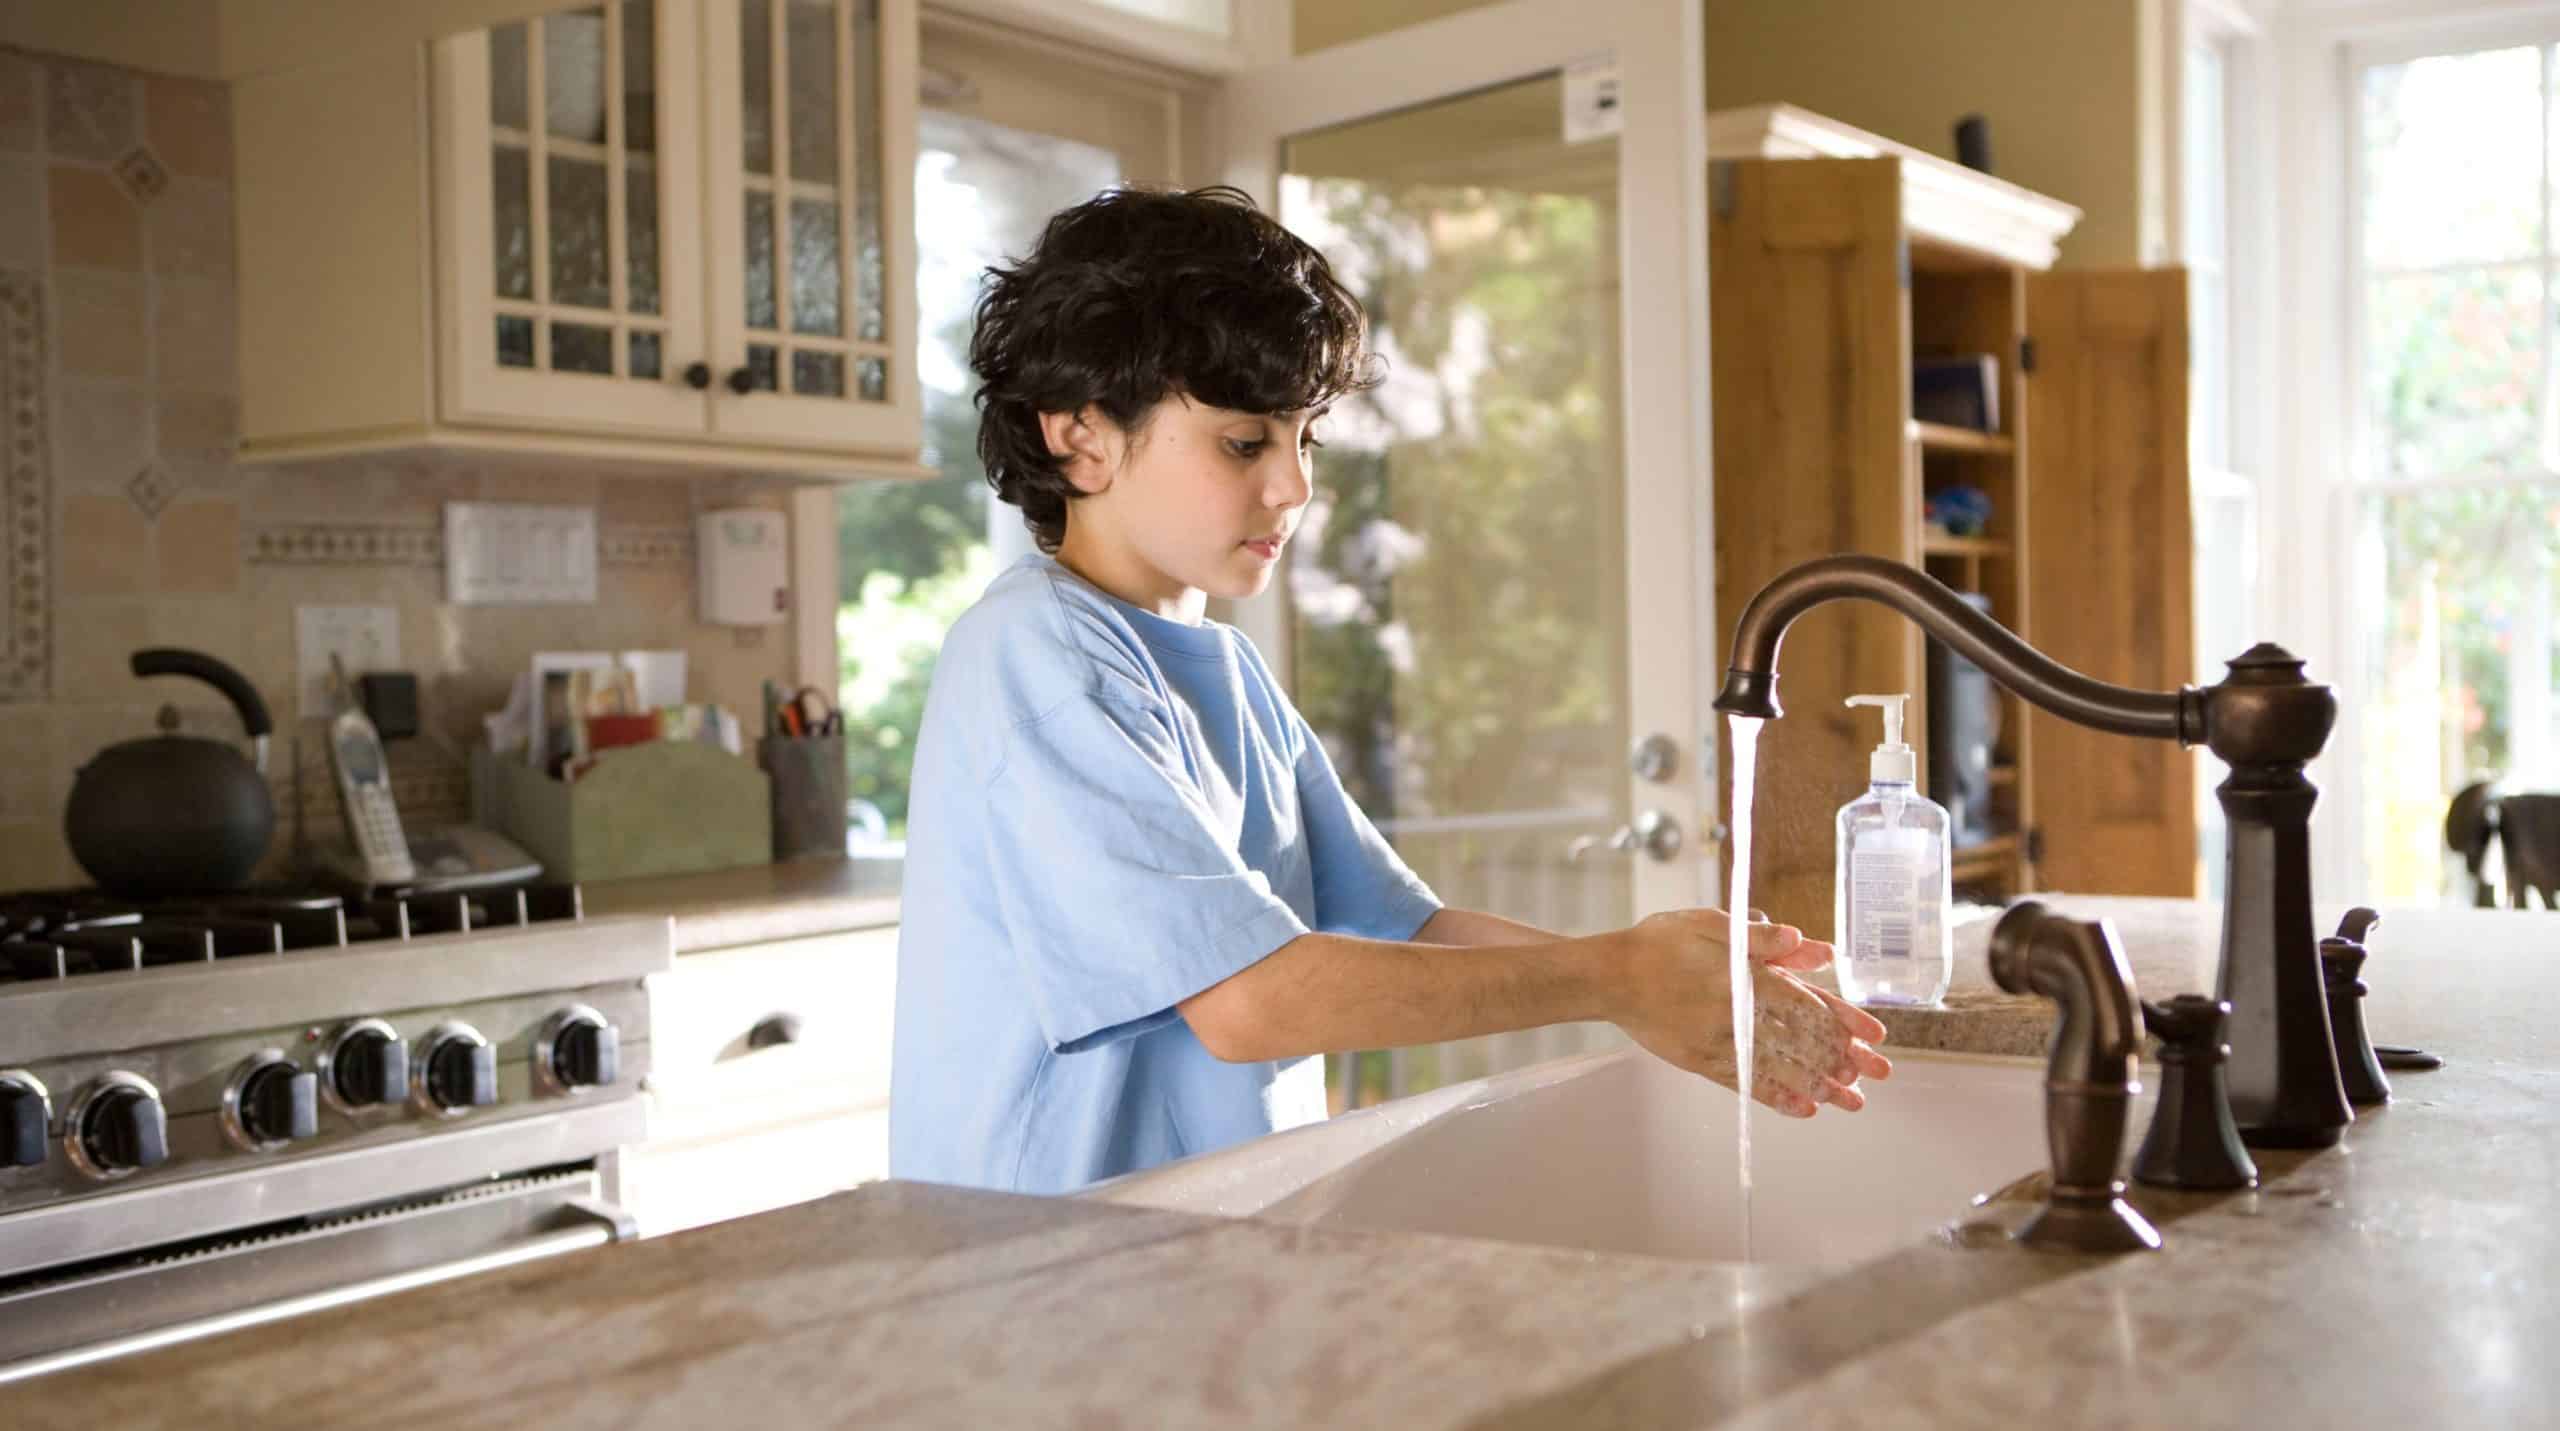 Child standing at a kitchen sink washing his hands